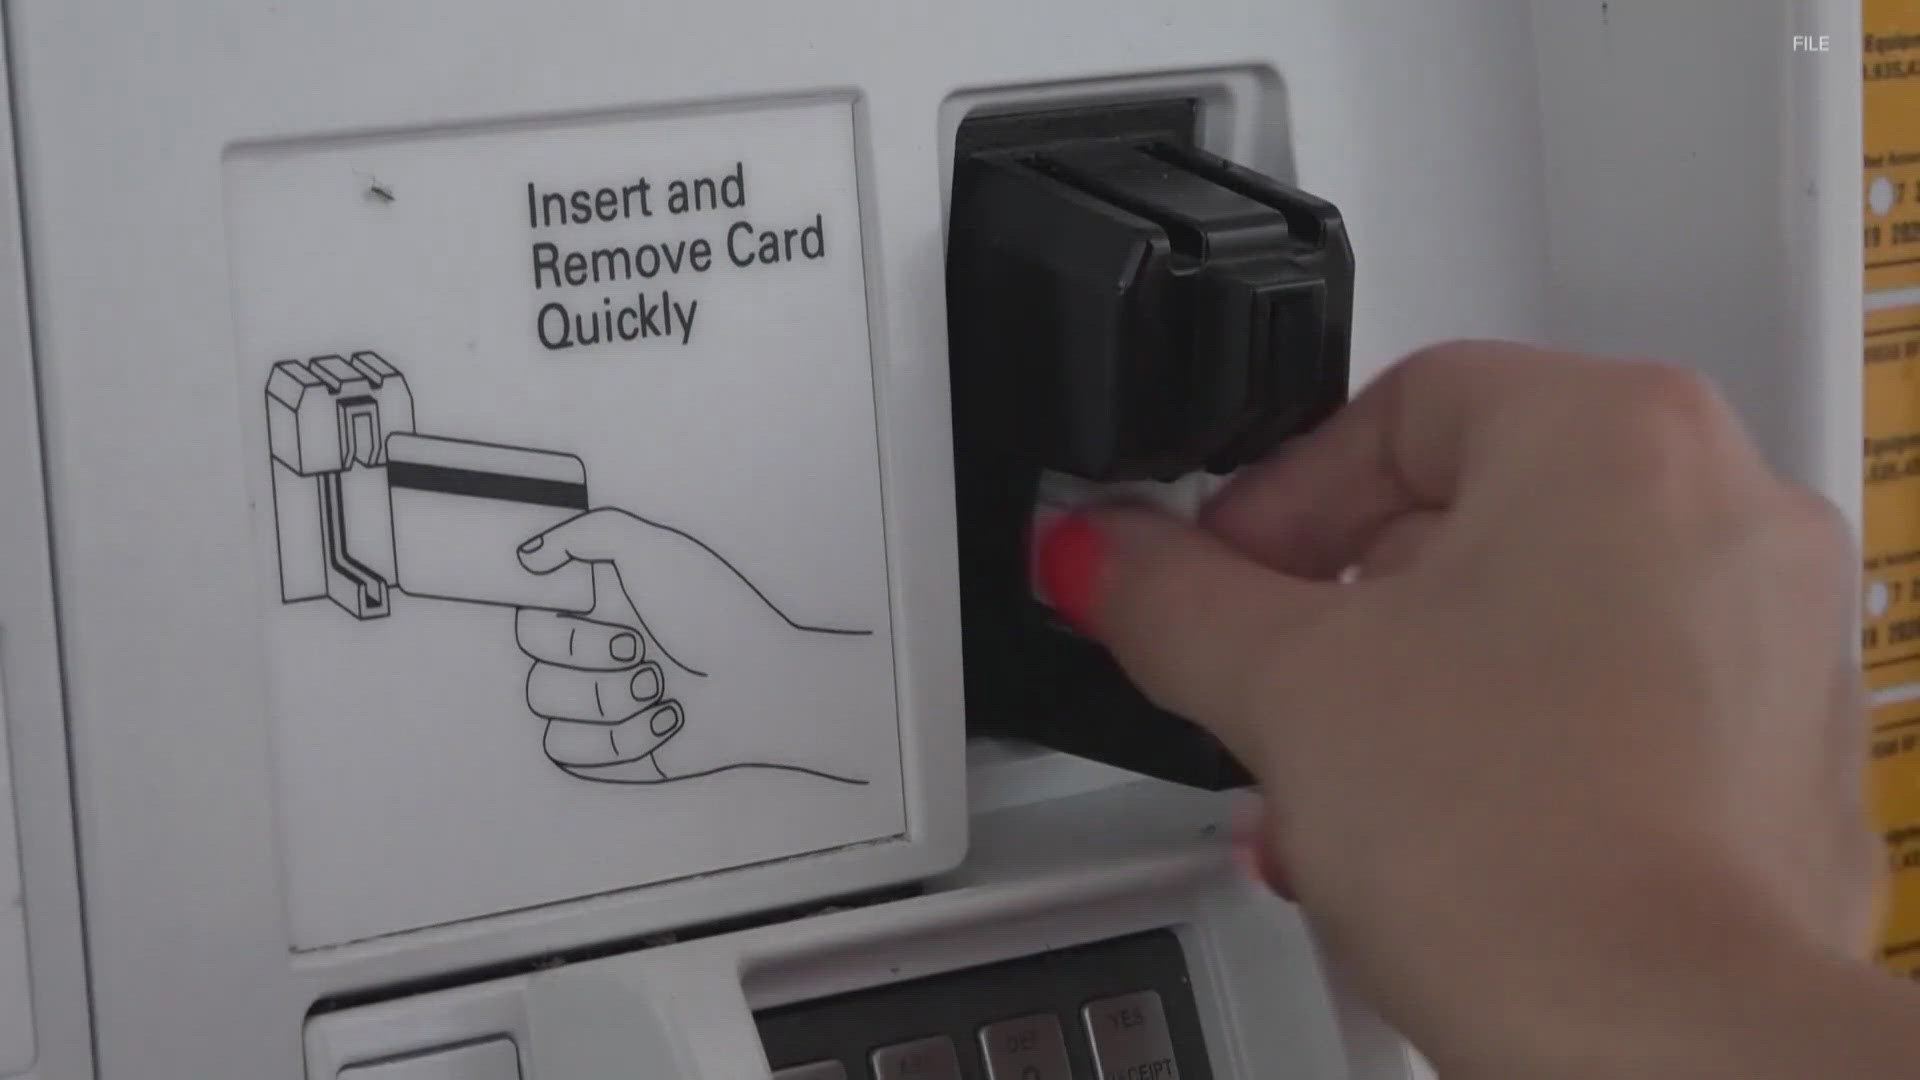 According to OPD, card skimmers have been found at places such as gas stations, grocery stores and ATM's. No arrests have been made in relation to the skimmers.